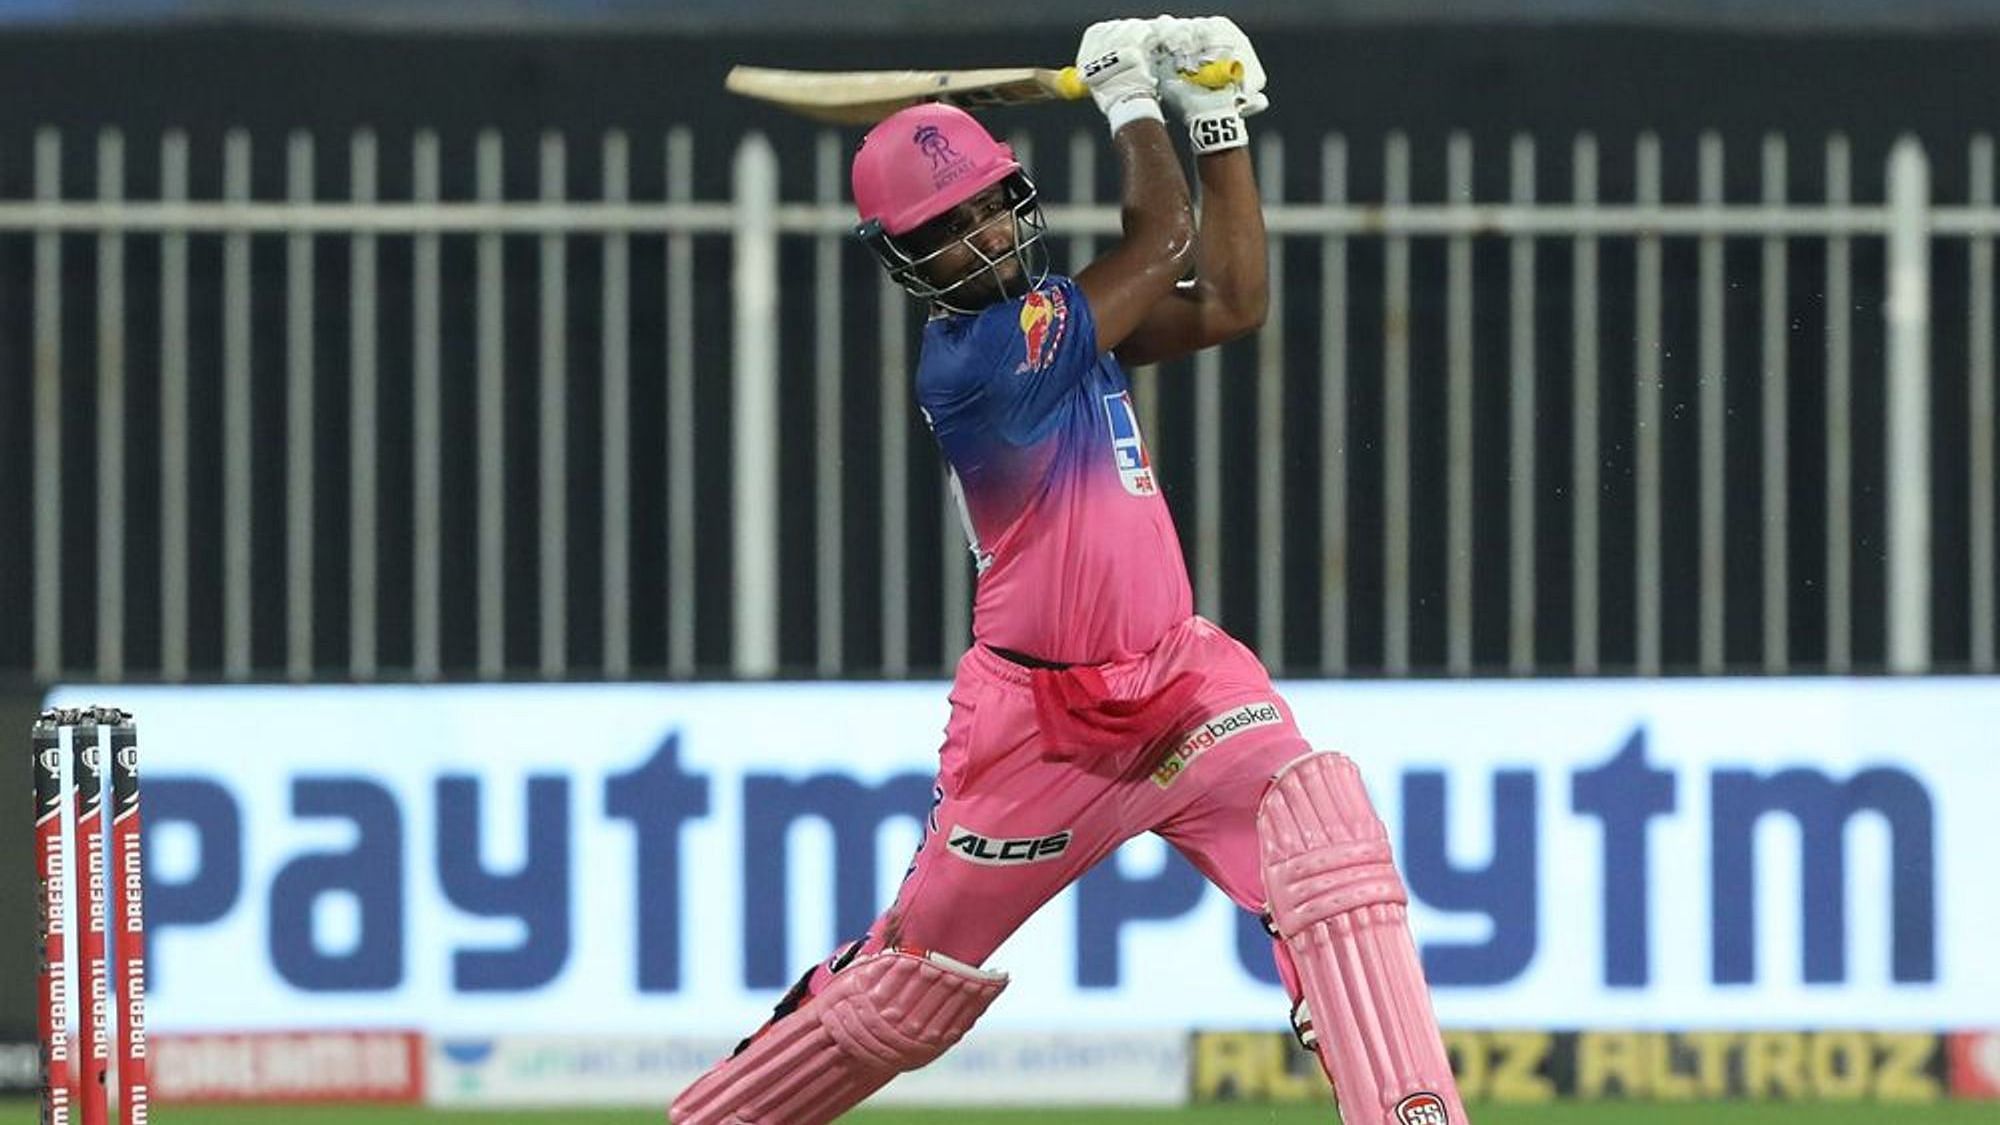 Congress MP Shashi Tharoor wrote after Sanju Samson’s 85-run knock that the youngster would be the next MS Dhoni.